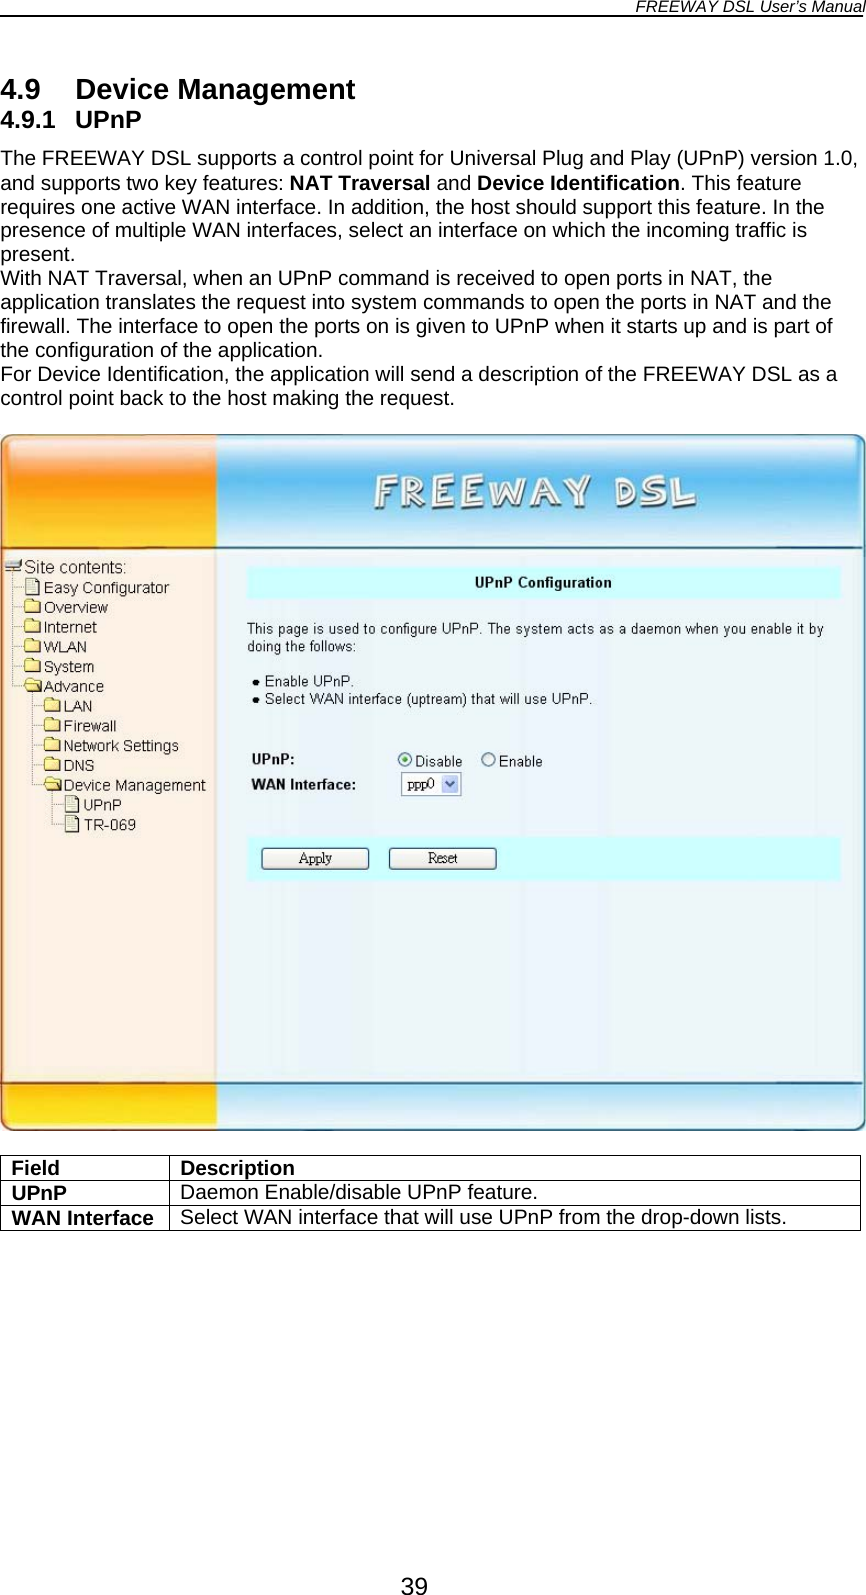 FREEWAY DSL User’s Manual  4.9 Device Management 4.9.1 UPnP The FREEWAY DSL supports a control point for Universal Plug and Play (UPnP) version 1.0, and supports two key features: NAT Traversal and Device Identification. This feature requires one active WAN interface. In addition, the host should support this feature. In the presence of multiple WAN interfaces, select an interface on which the incoming traffic is present. With NAT Traversal, when an UPnP command is received to open ports in NAT, the application translates the request into system commands to open the ports in NAT and the firewall. The interface to open the ports on is given to UPnP when it starts up and is part of the configuration of the application. For Device Identification, the application will send a description of the FREEWAY DSL as a control point back to the host making the request.    Field Description UPnP  Daemon Enable/disable UPnP feature. WAN Interface  Select WAN interface that will use UPnP from the drop-down lists.  39 